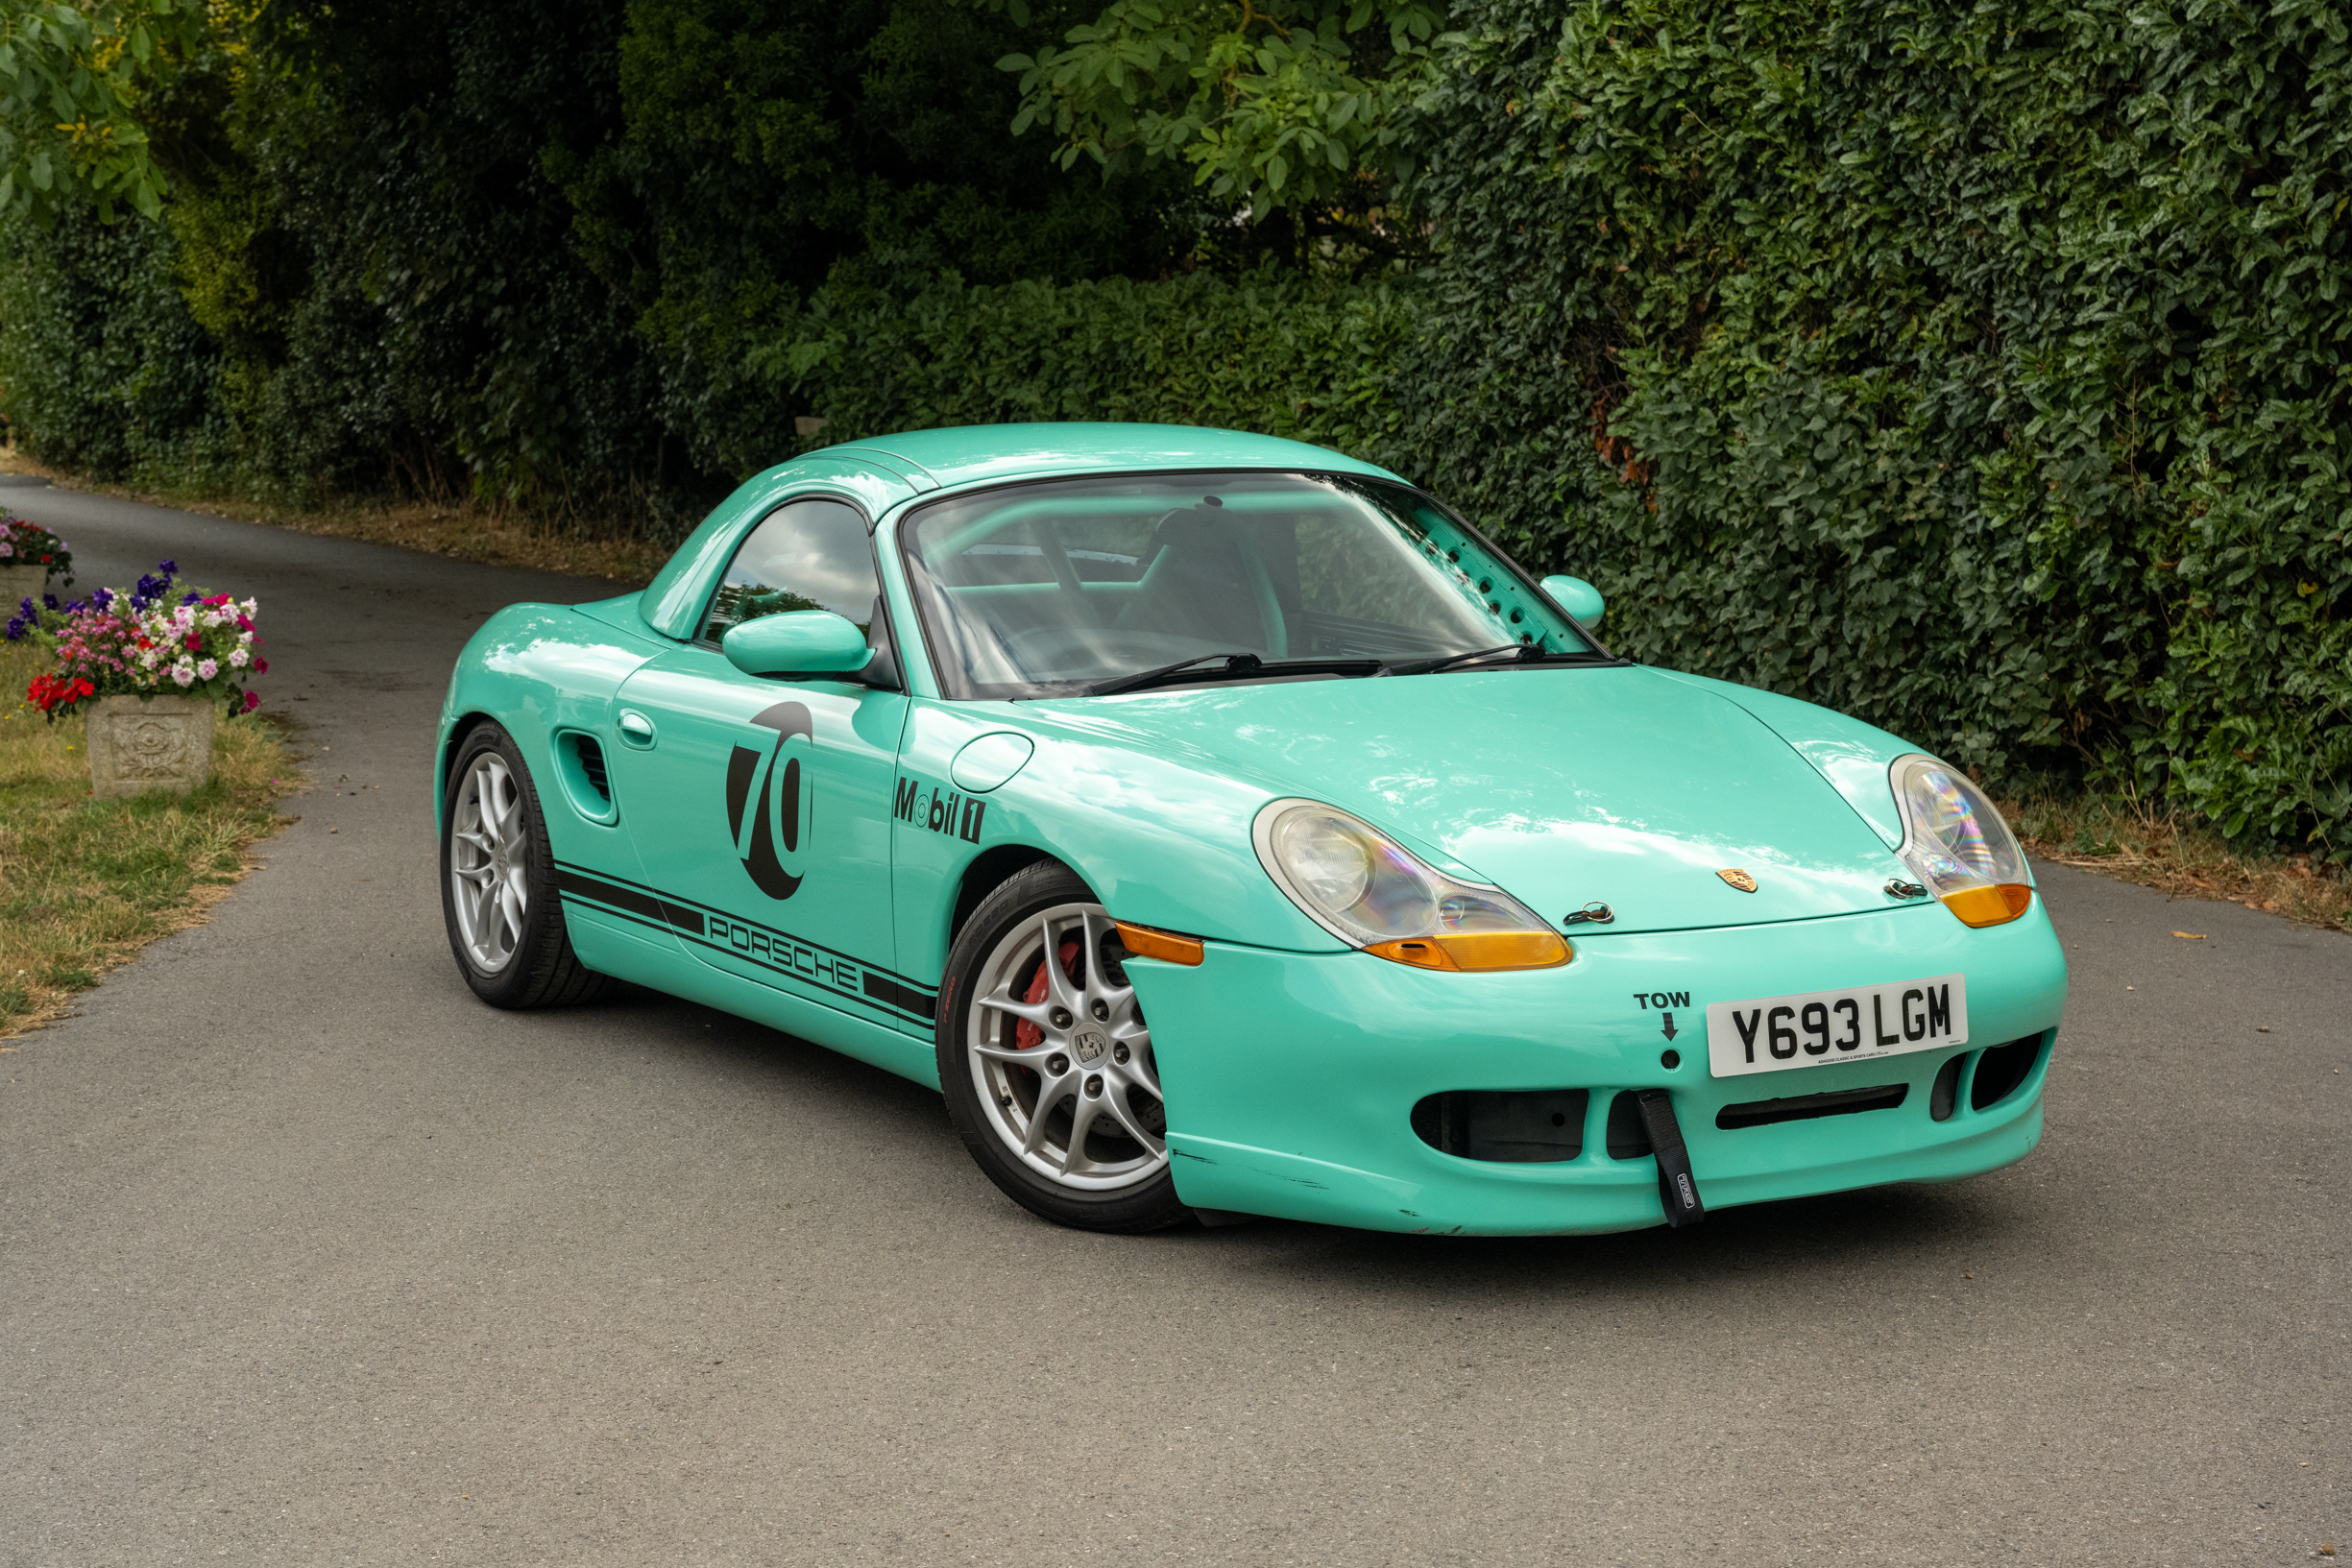 2001 PORSCHE (986) BOXSTER TRACK CAR for sale by auction in Berkshire, United Kingdom pic photo